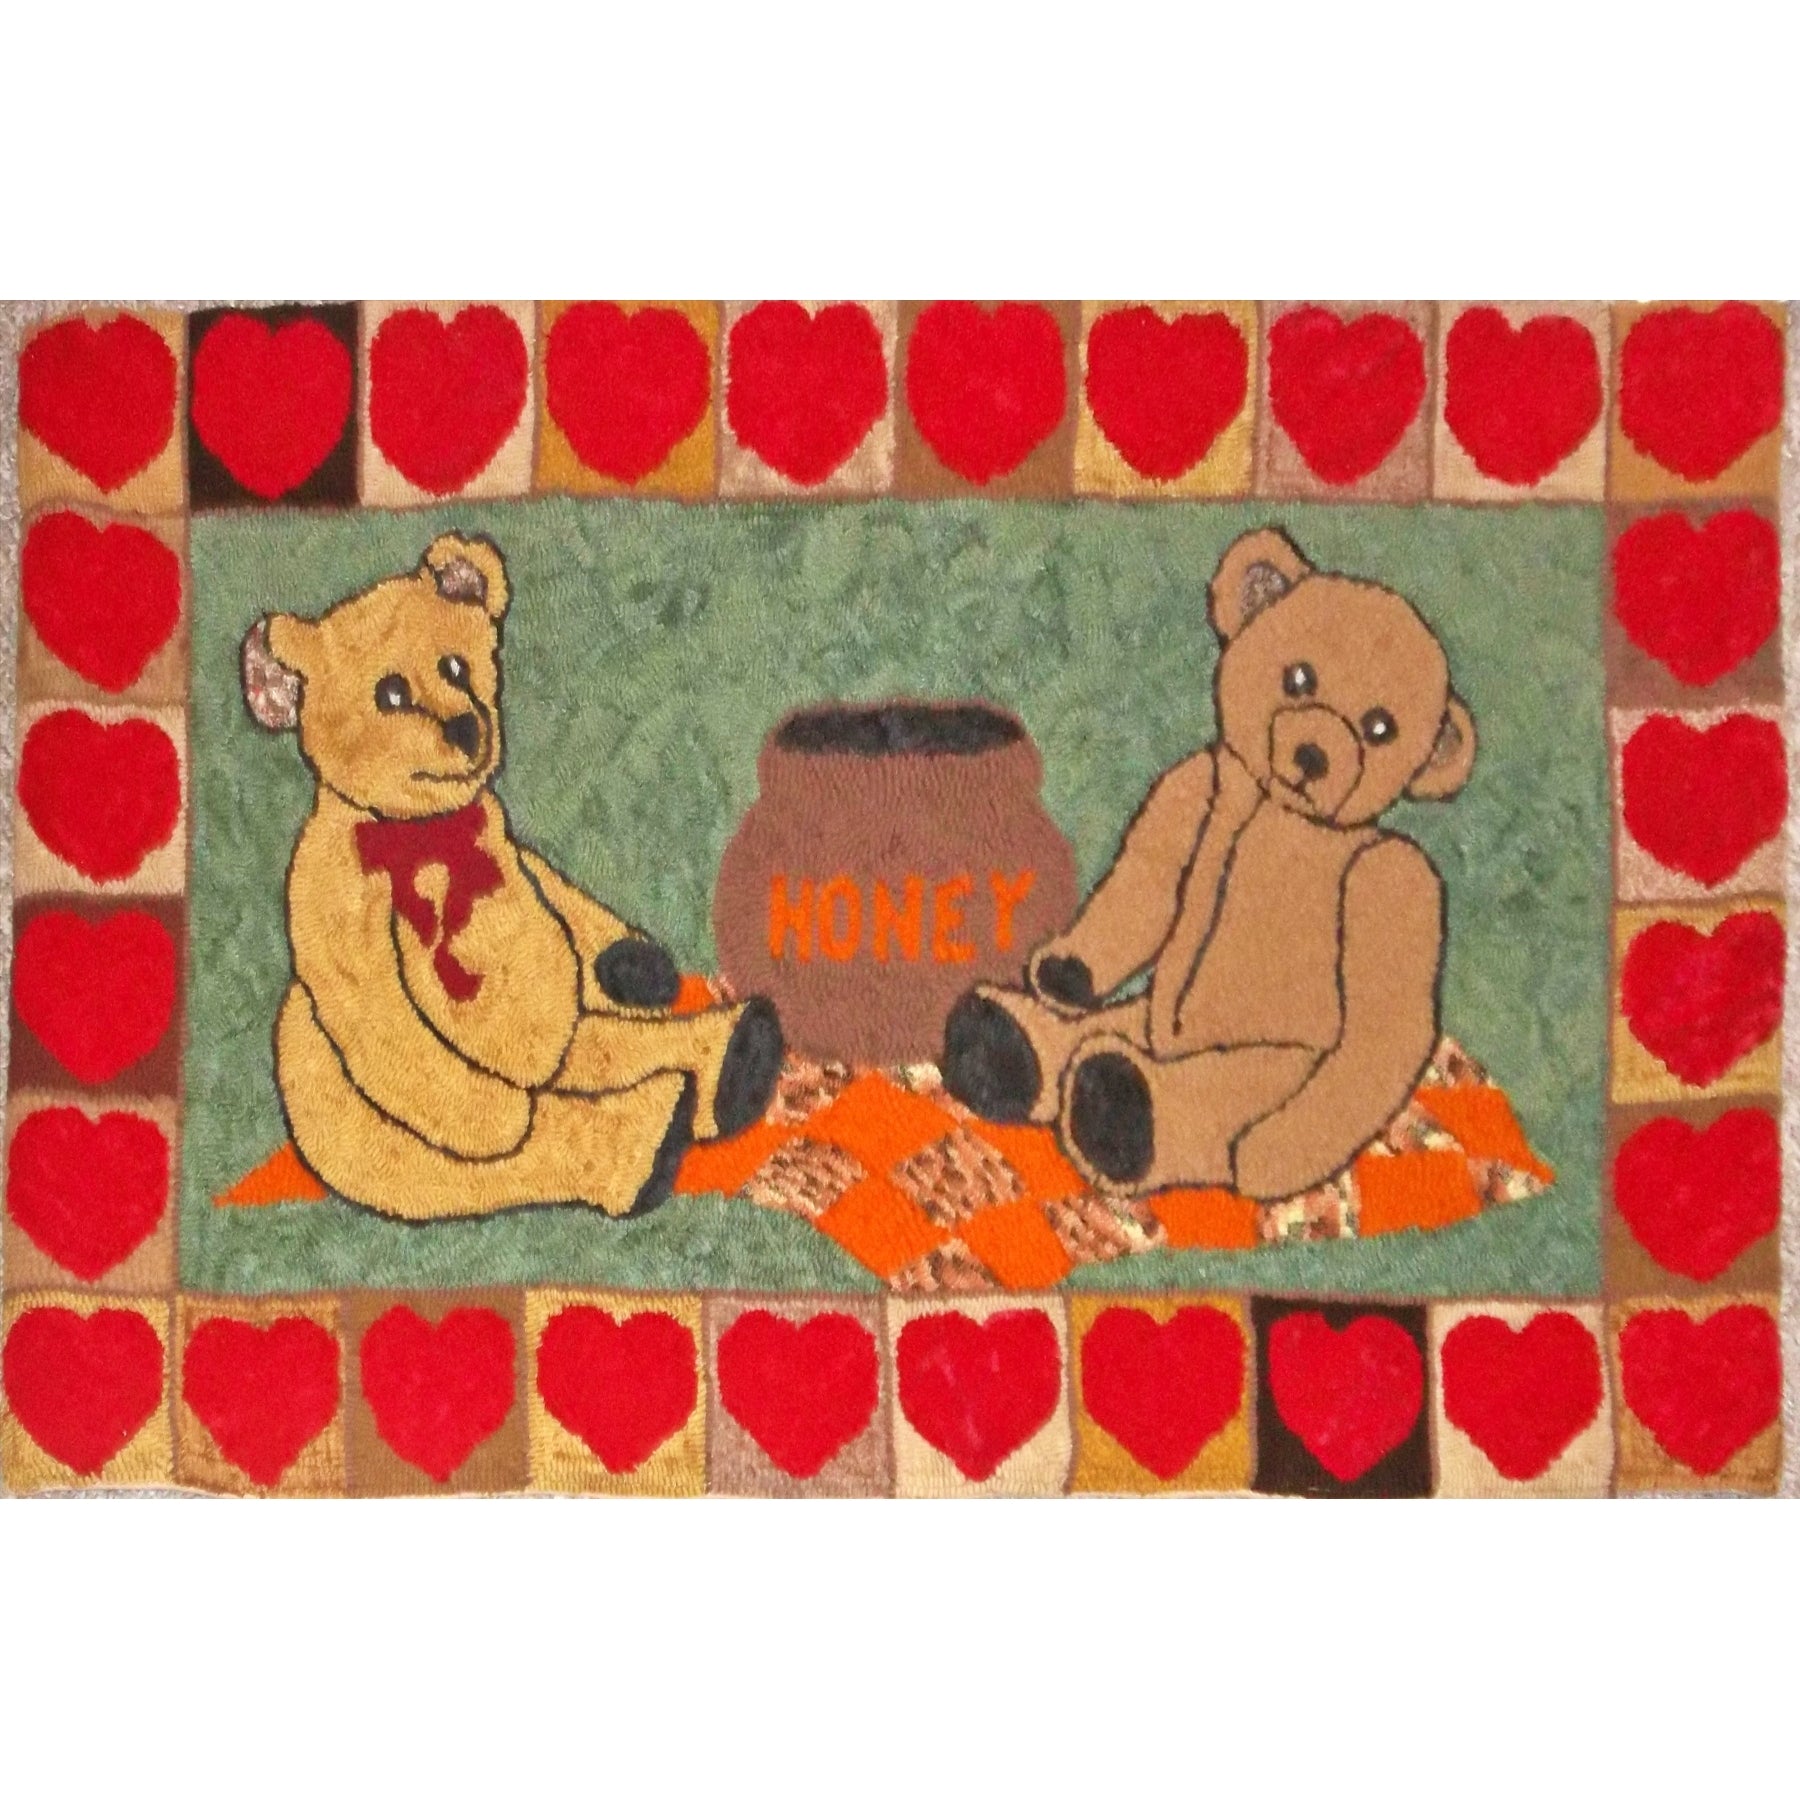 A Teddy Bears Picnic, rug hooked by Connie Lorch